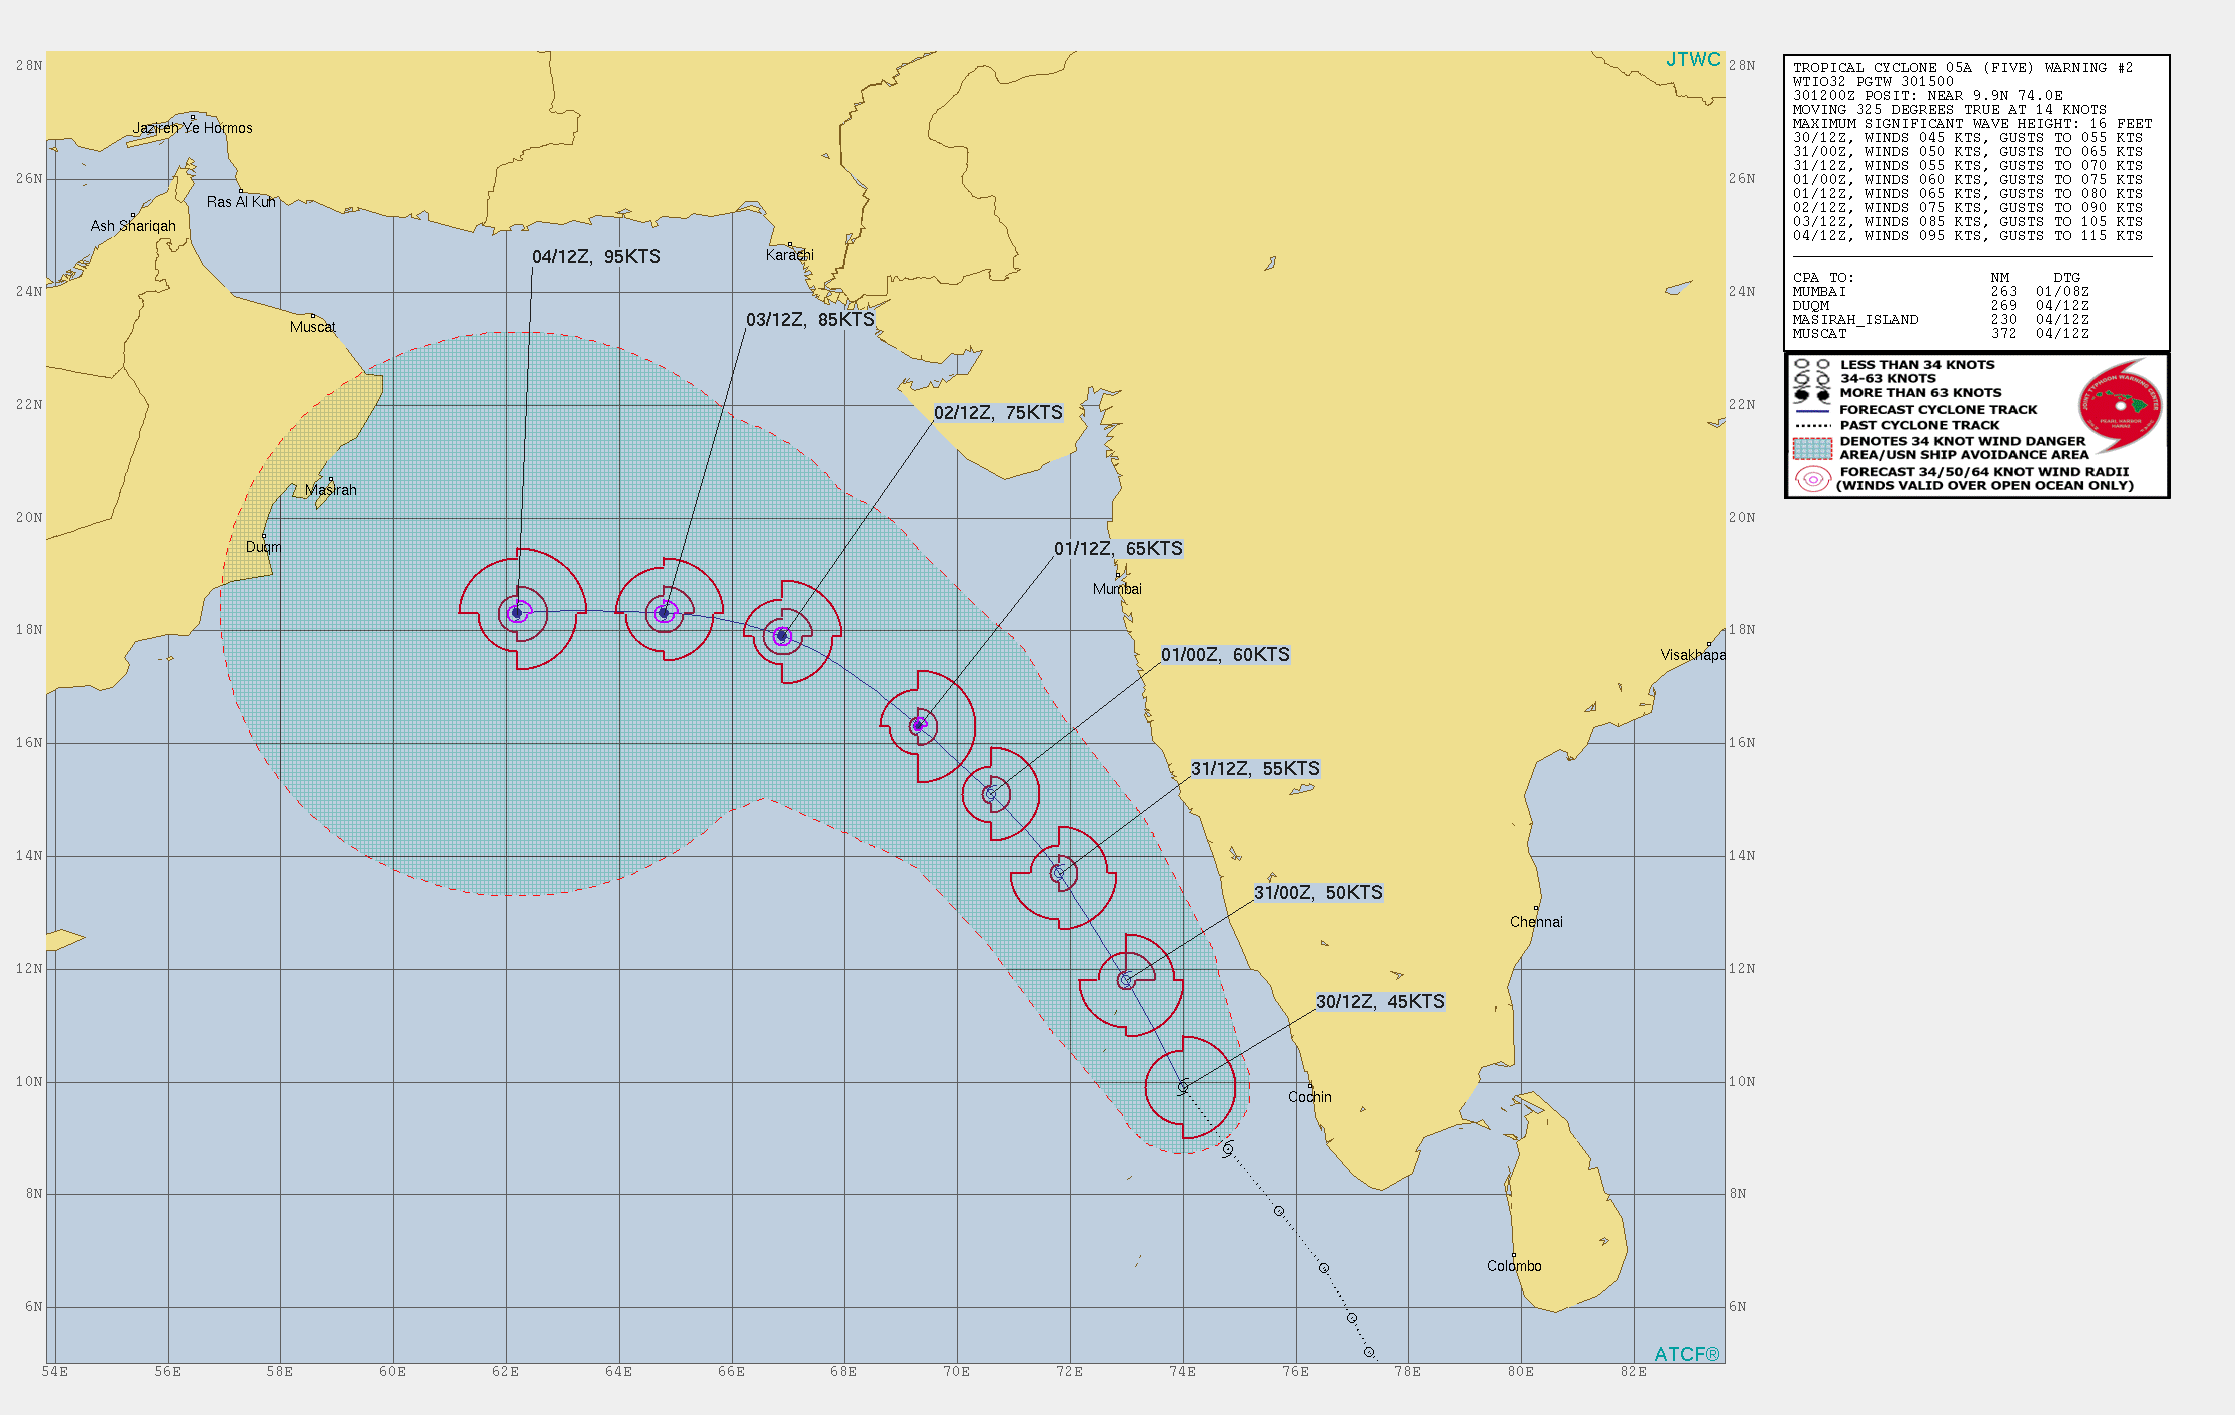 TC 05A: GRADUAL INTENSIFICATION EXPECTED UP TO MINIMAL TYPHOON INTENSITY IN 48H